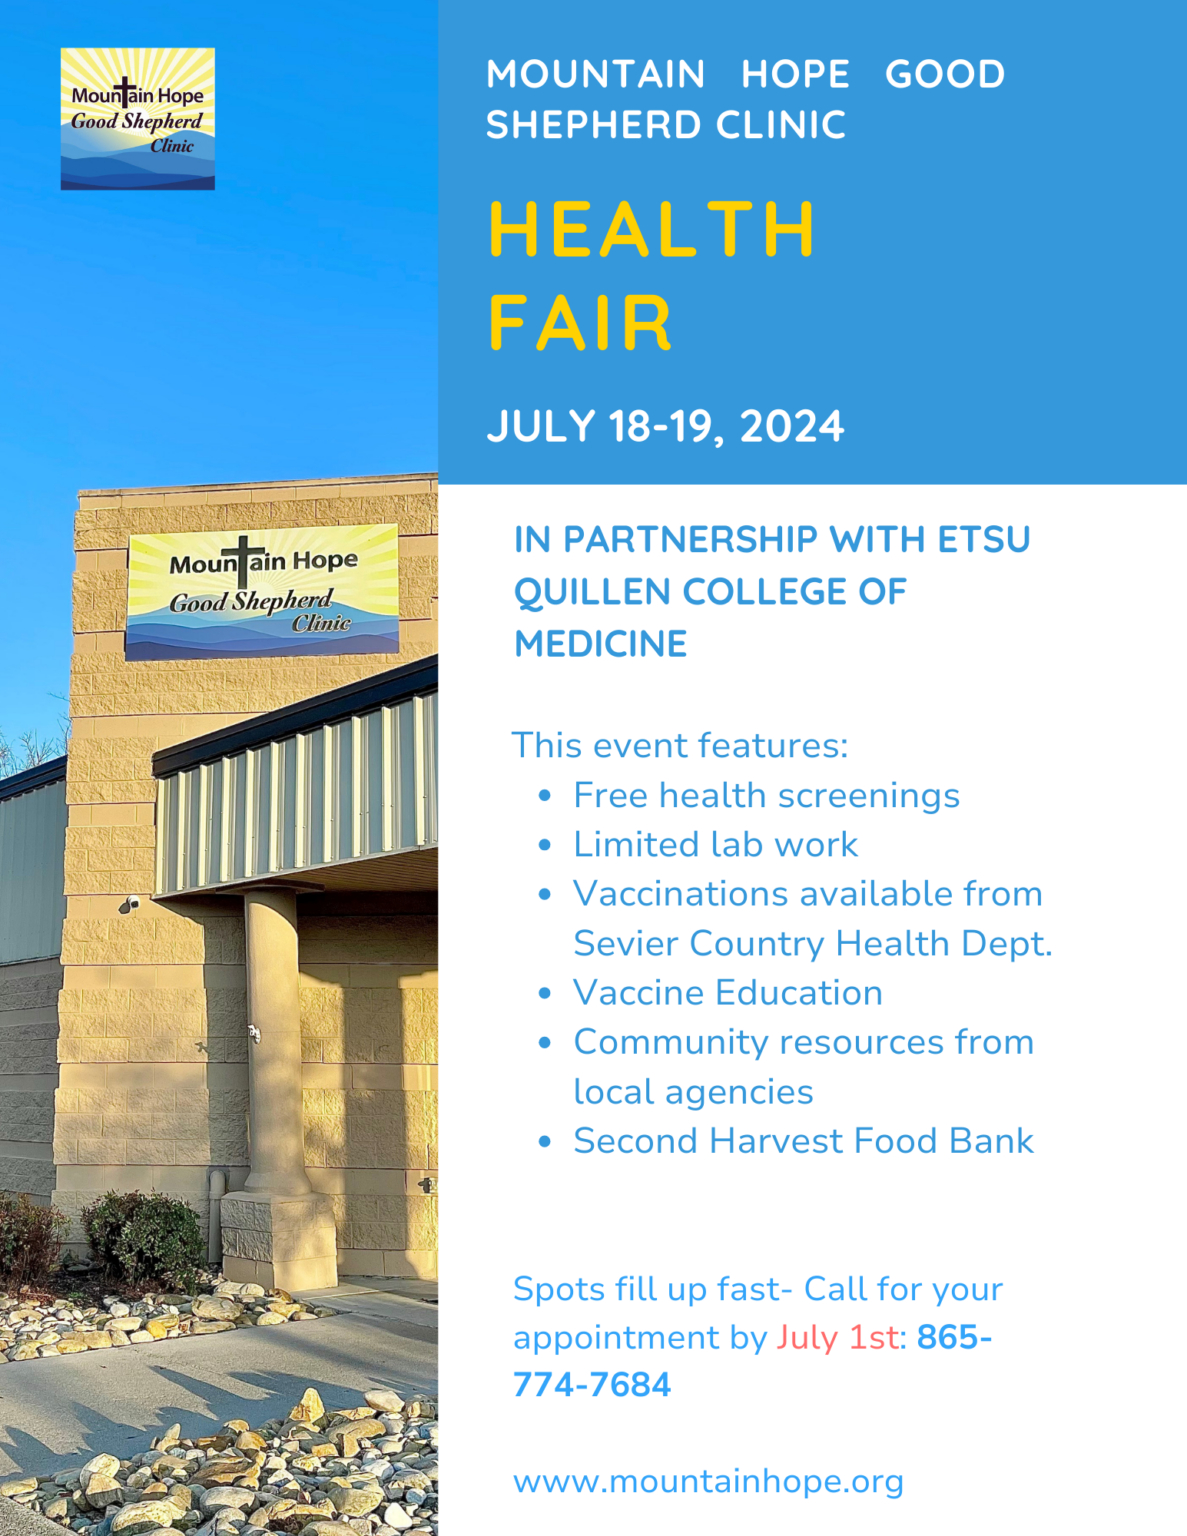 Health Fair July 18-19 2024. Make your appointment today at 865-774-7684!